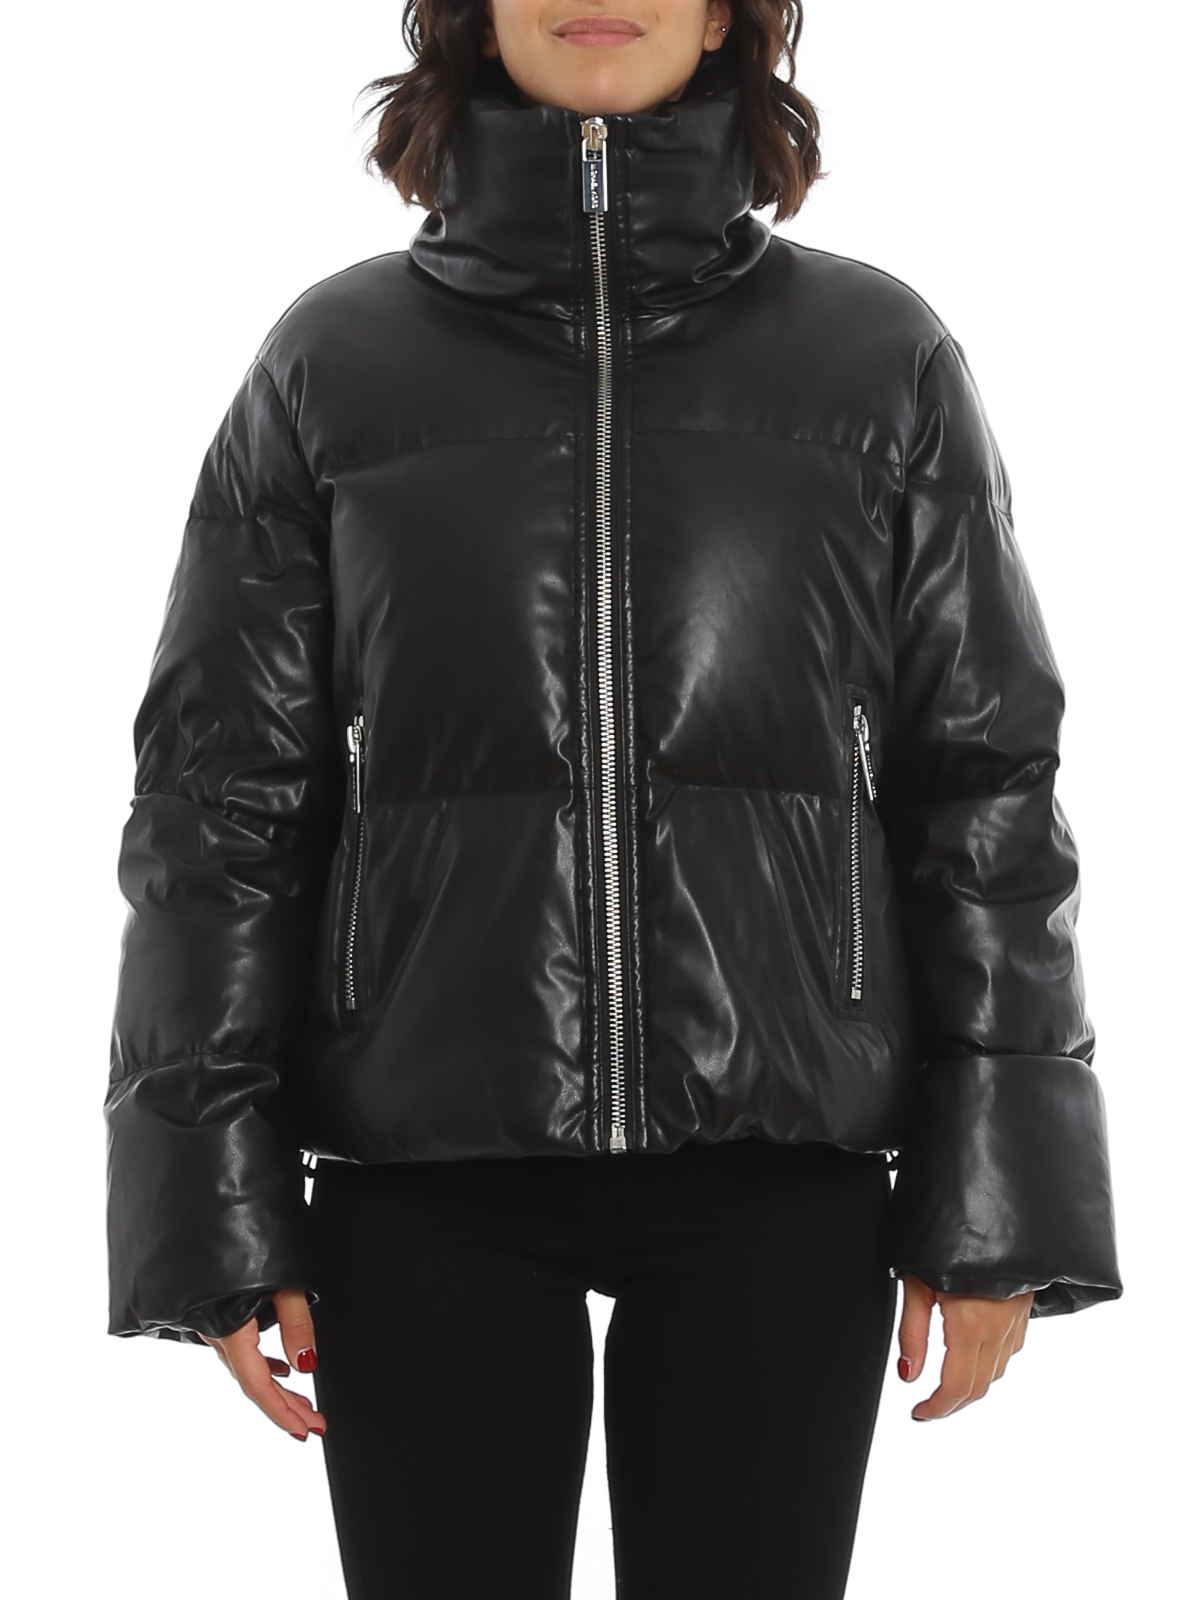 michael kors quilted leather jacket